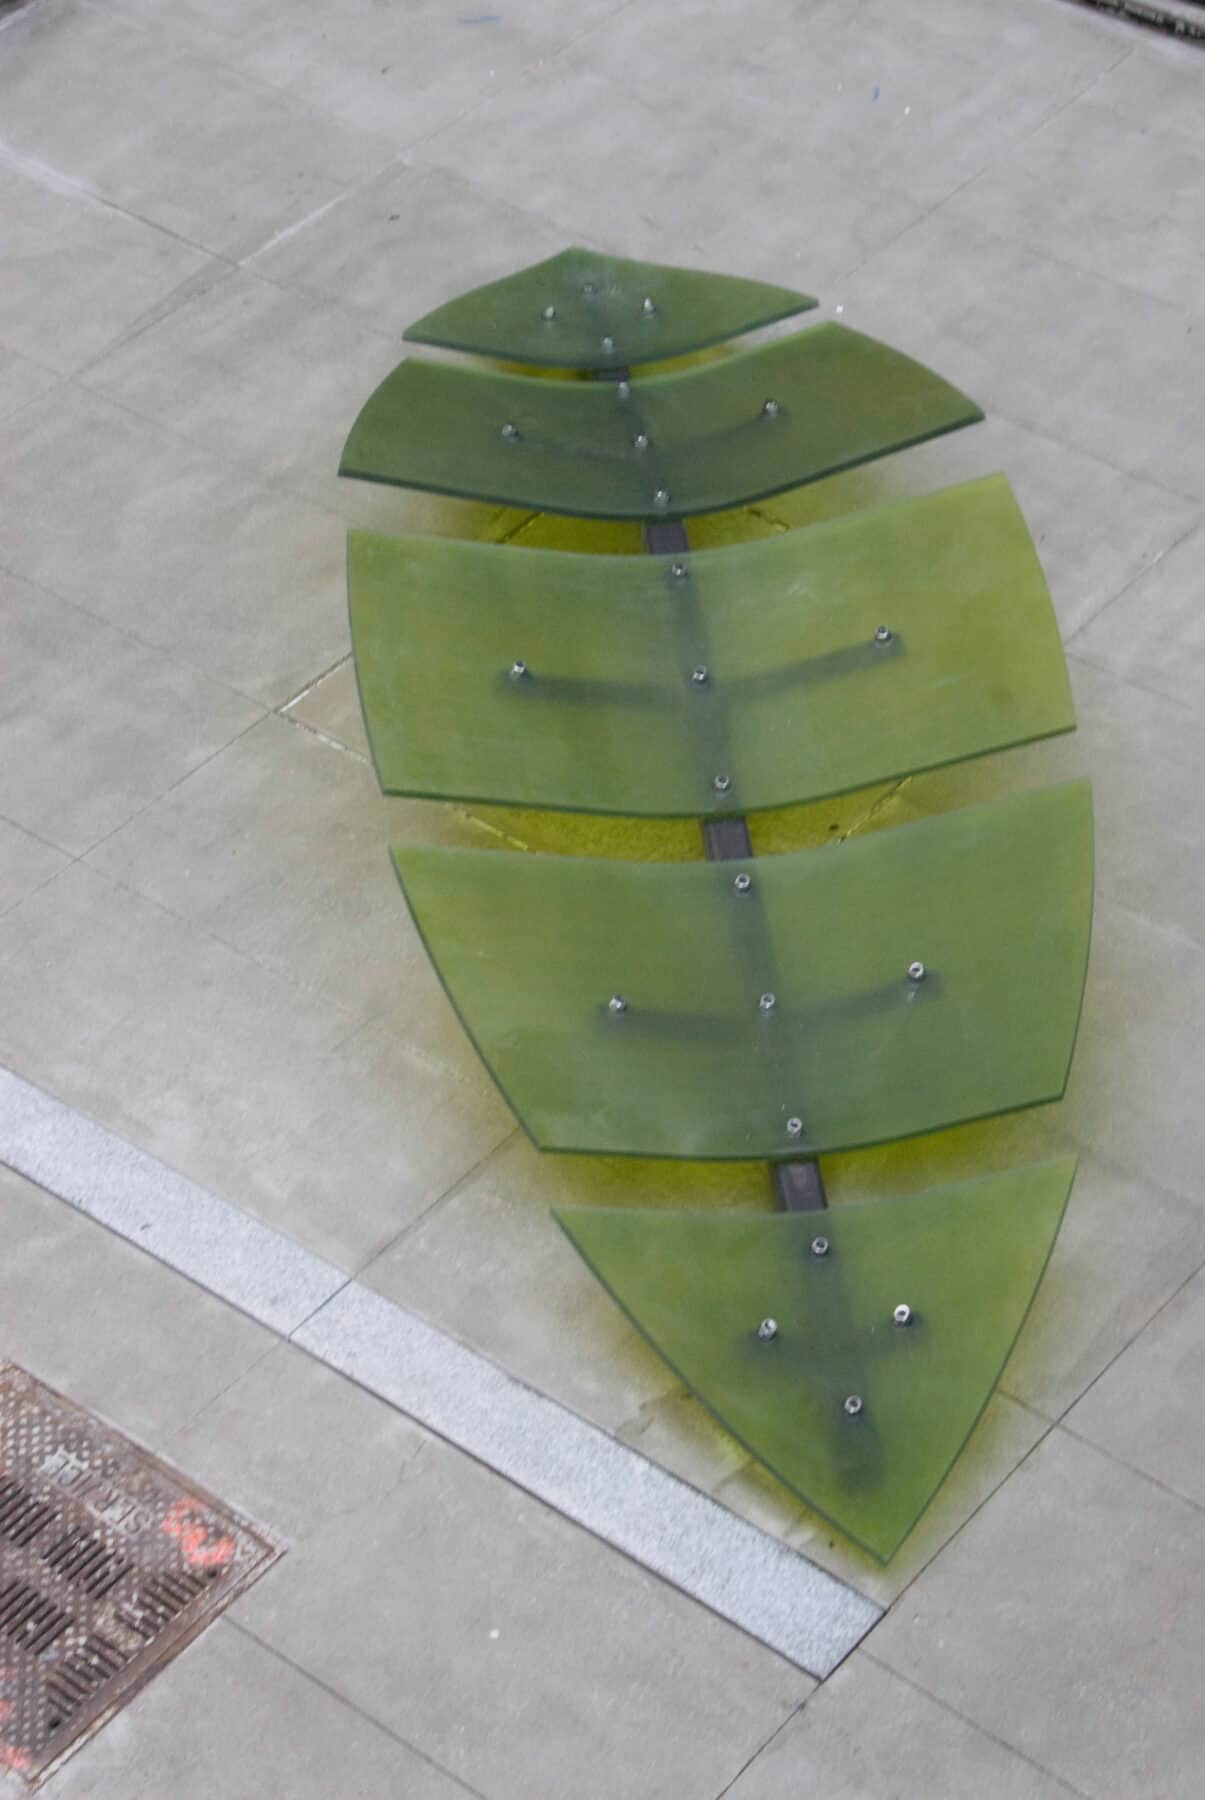 Custom Fabrication of Architectural Acrylic Leaf from Construction Specialty Projects by Commercial Builder & General Contractor Structural Enterprises